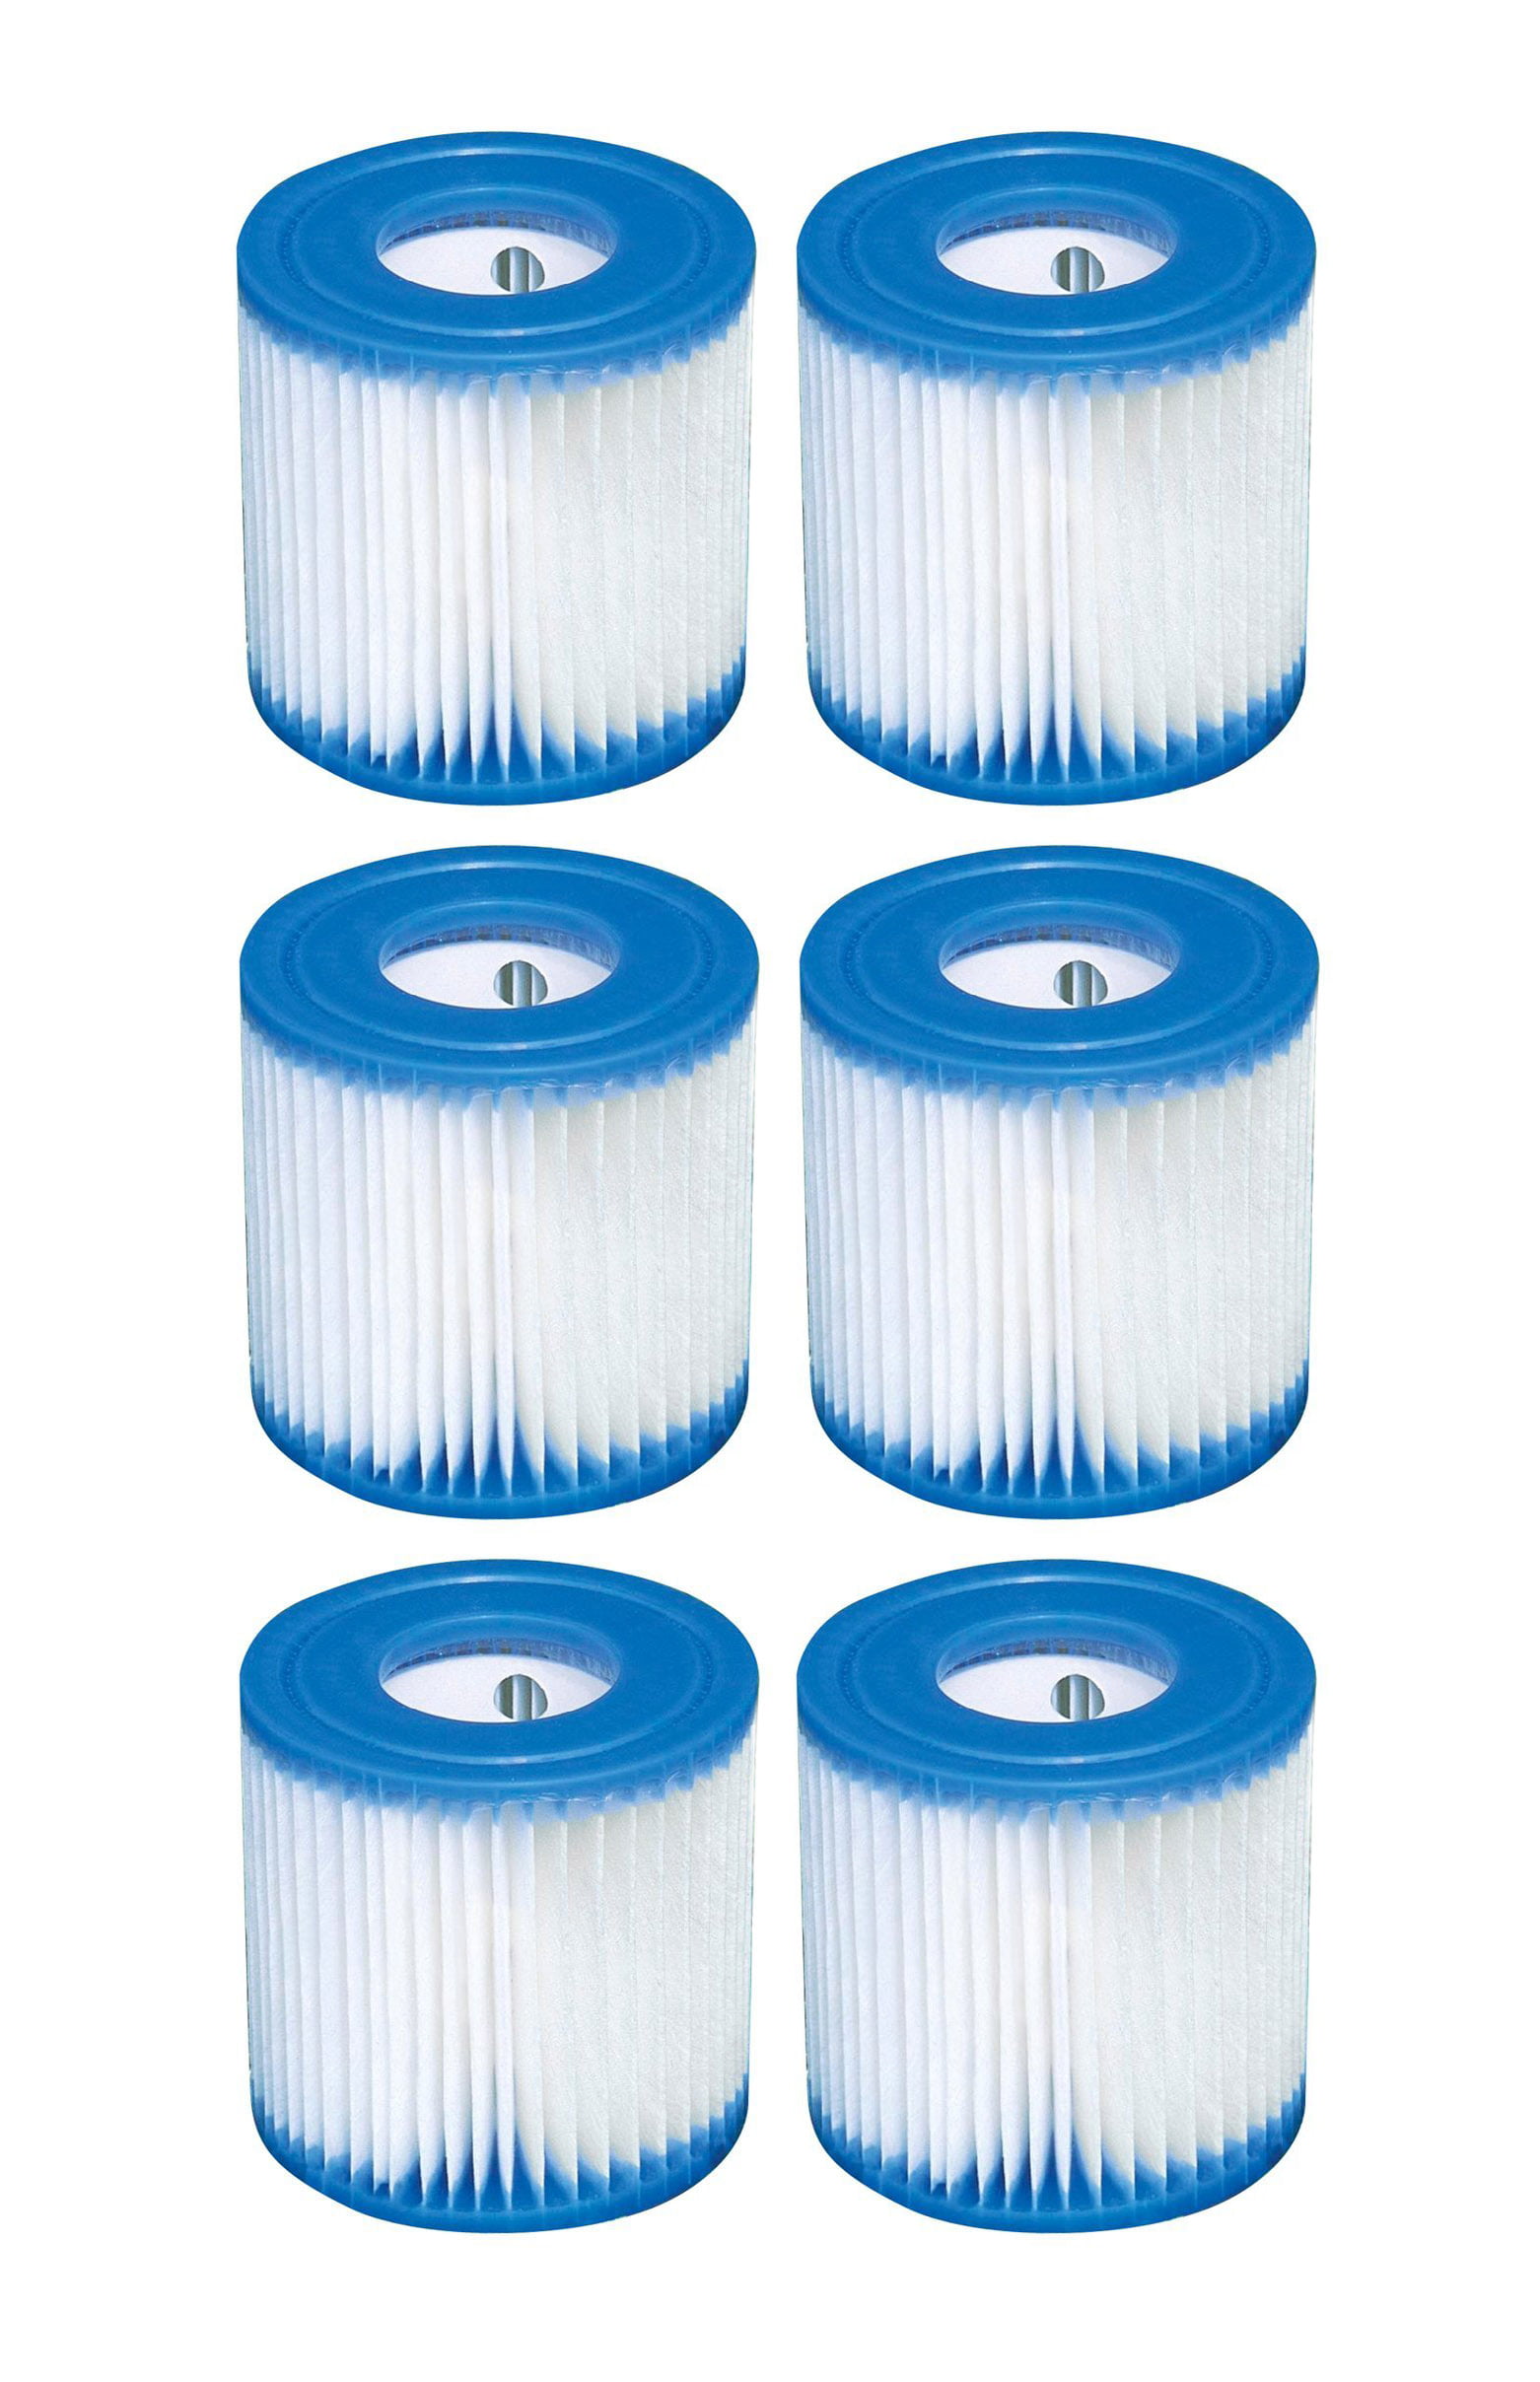 6 x Bestway Filter Cartridge Pool Filter Replacement Filter Lay-Z-Spa Size 6 58323